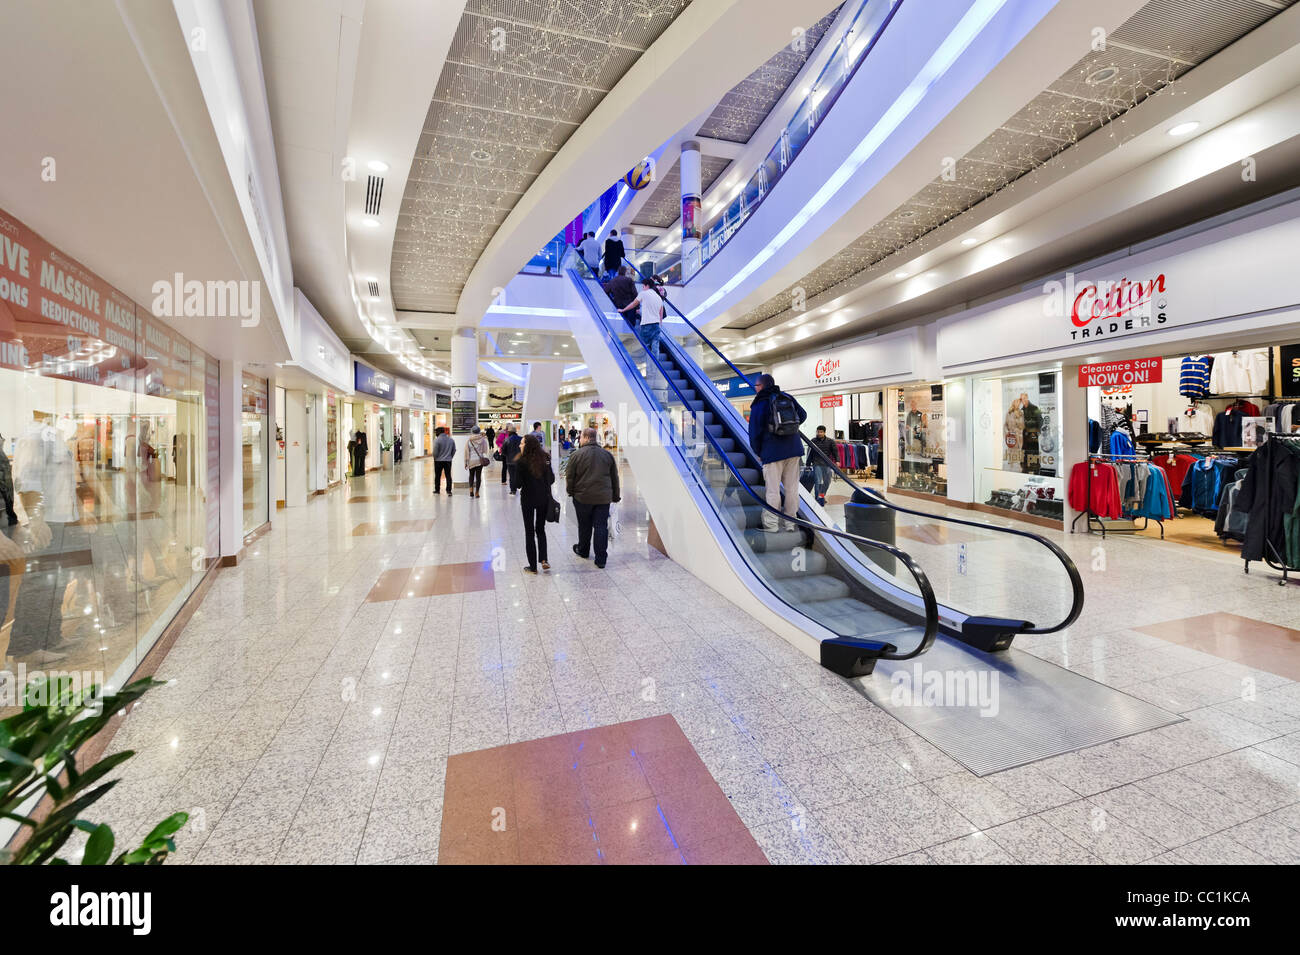 El Lowry Outlet Mall Shopping Centre, Salford, Manchester, Reino Unido Foto de stock